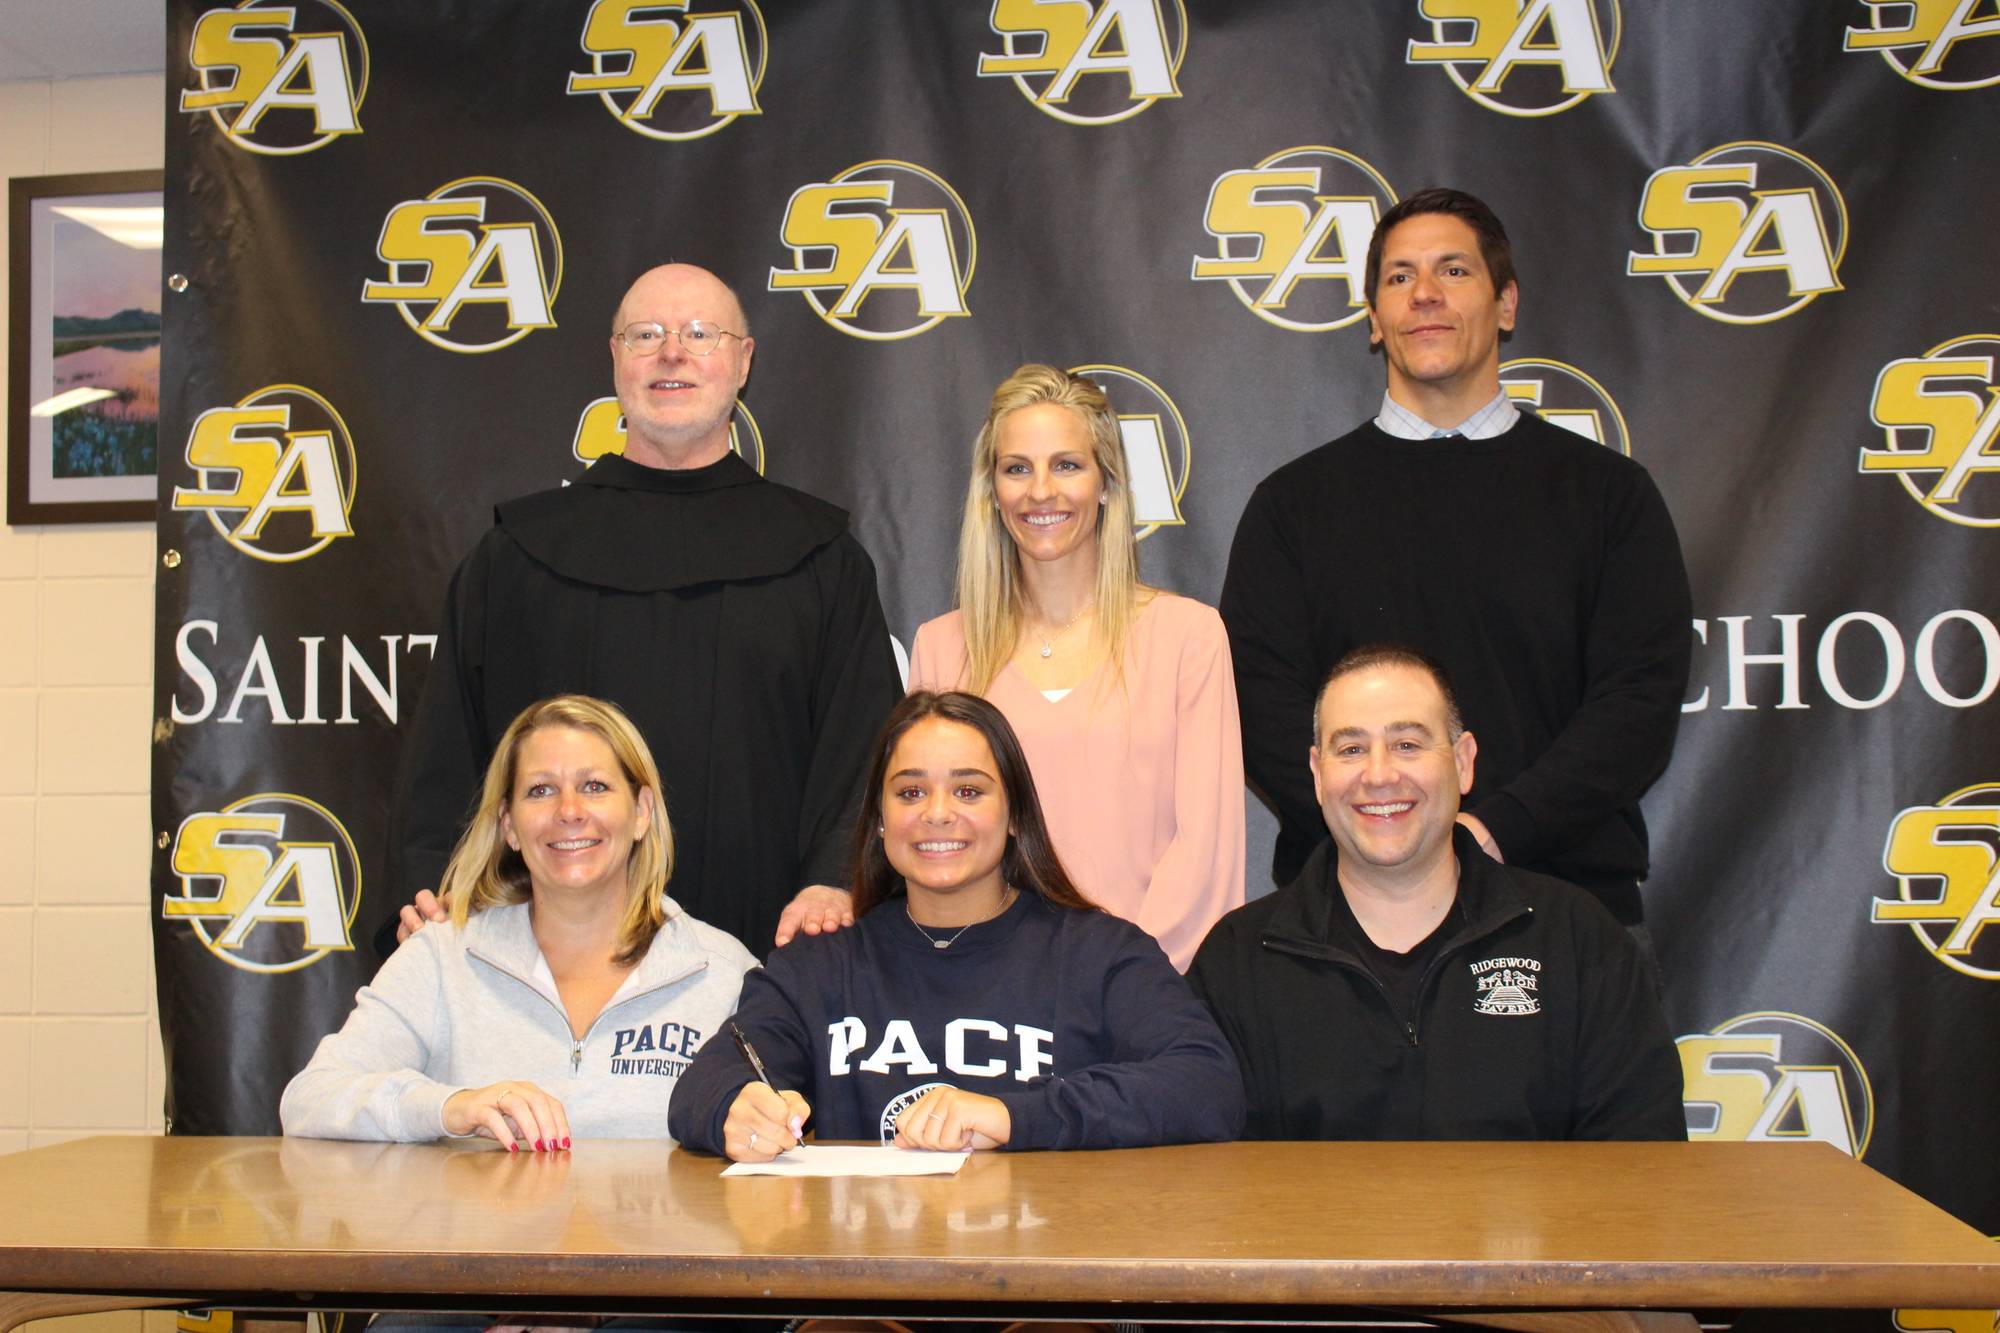 Congratulations to Madison Paccione on committing to Pace  University to play Soccer 